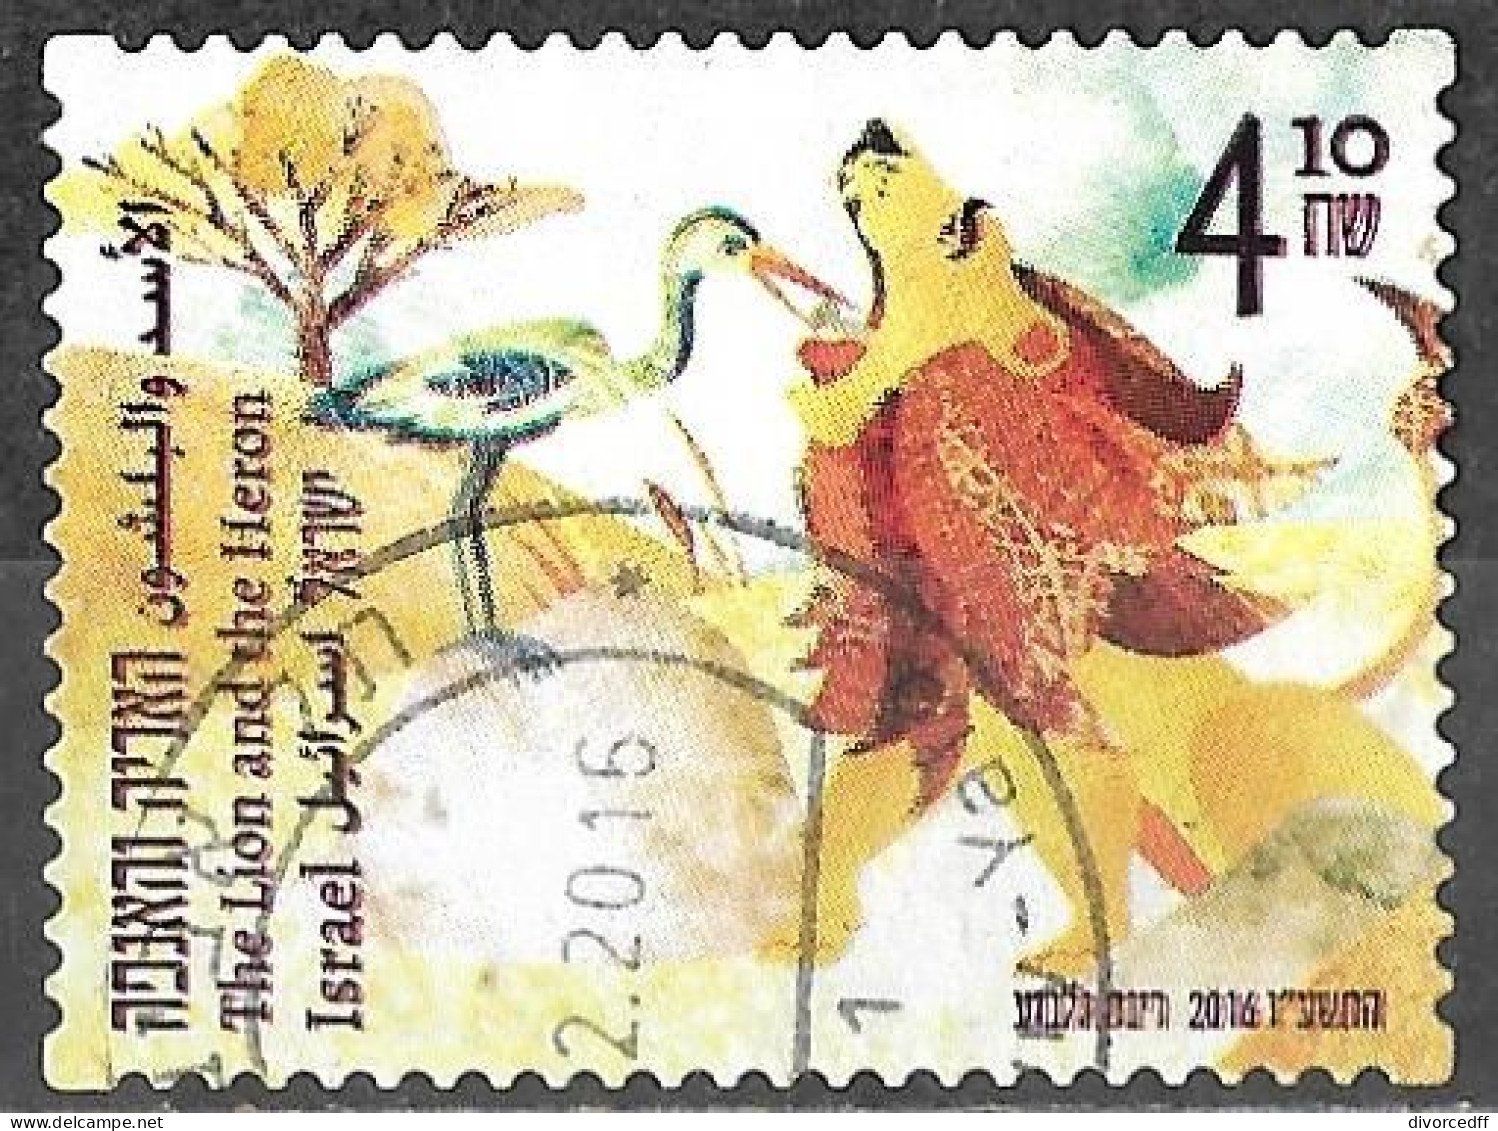 Israel 2016 Used Stamp Parables Of The Sages The Lion And The Heron [INLT12] - Used Stamps (without Tabs)